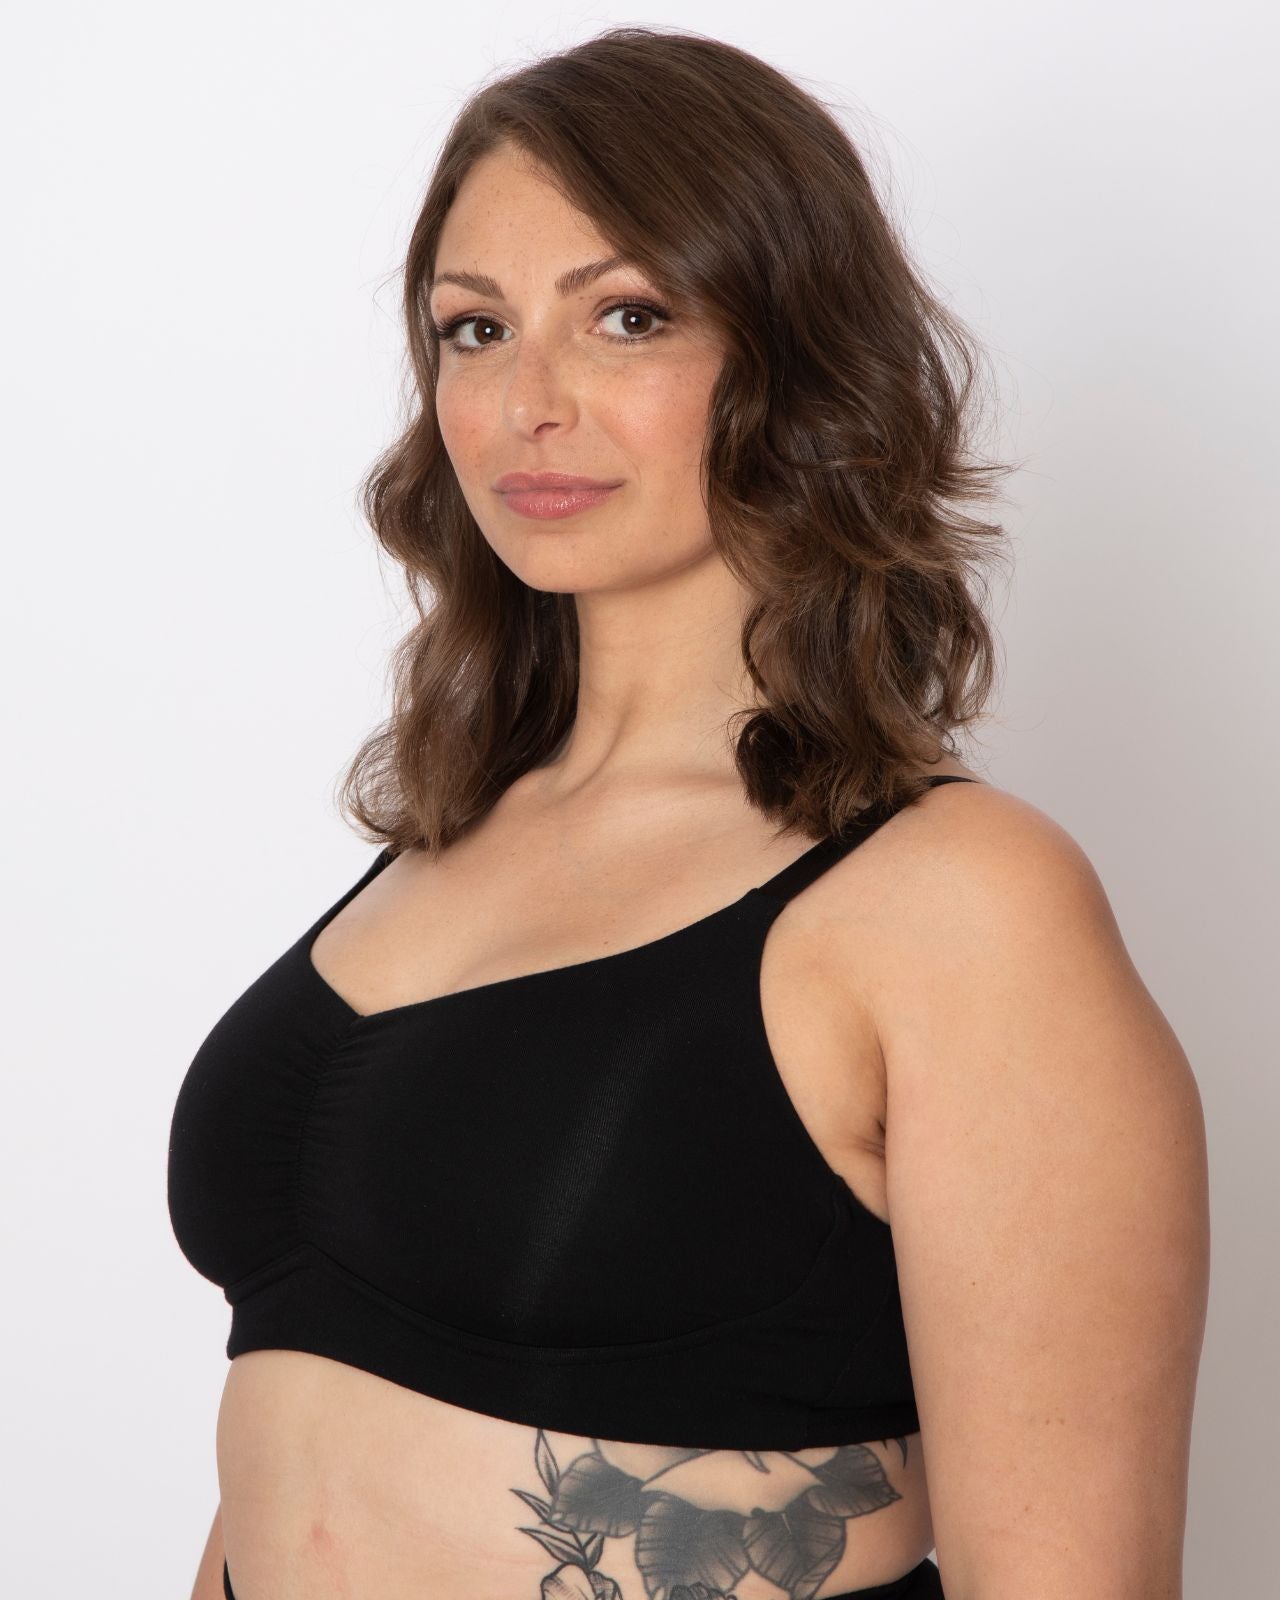 Anaono Women's Monica Pocketed Post-surgery Recovery Full Coverage Bra  Black - Xx Large : Target